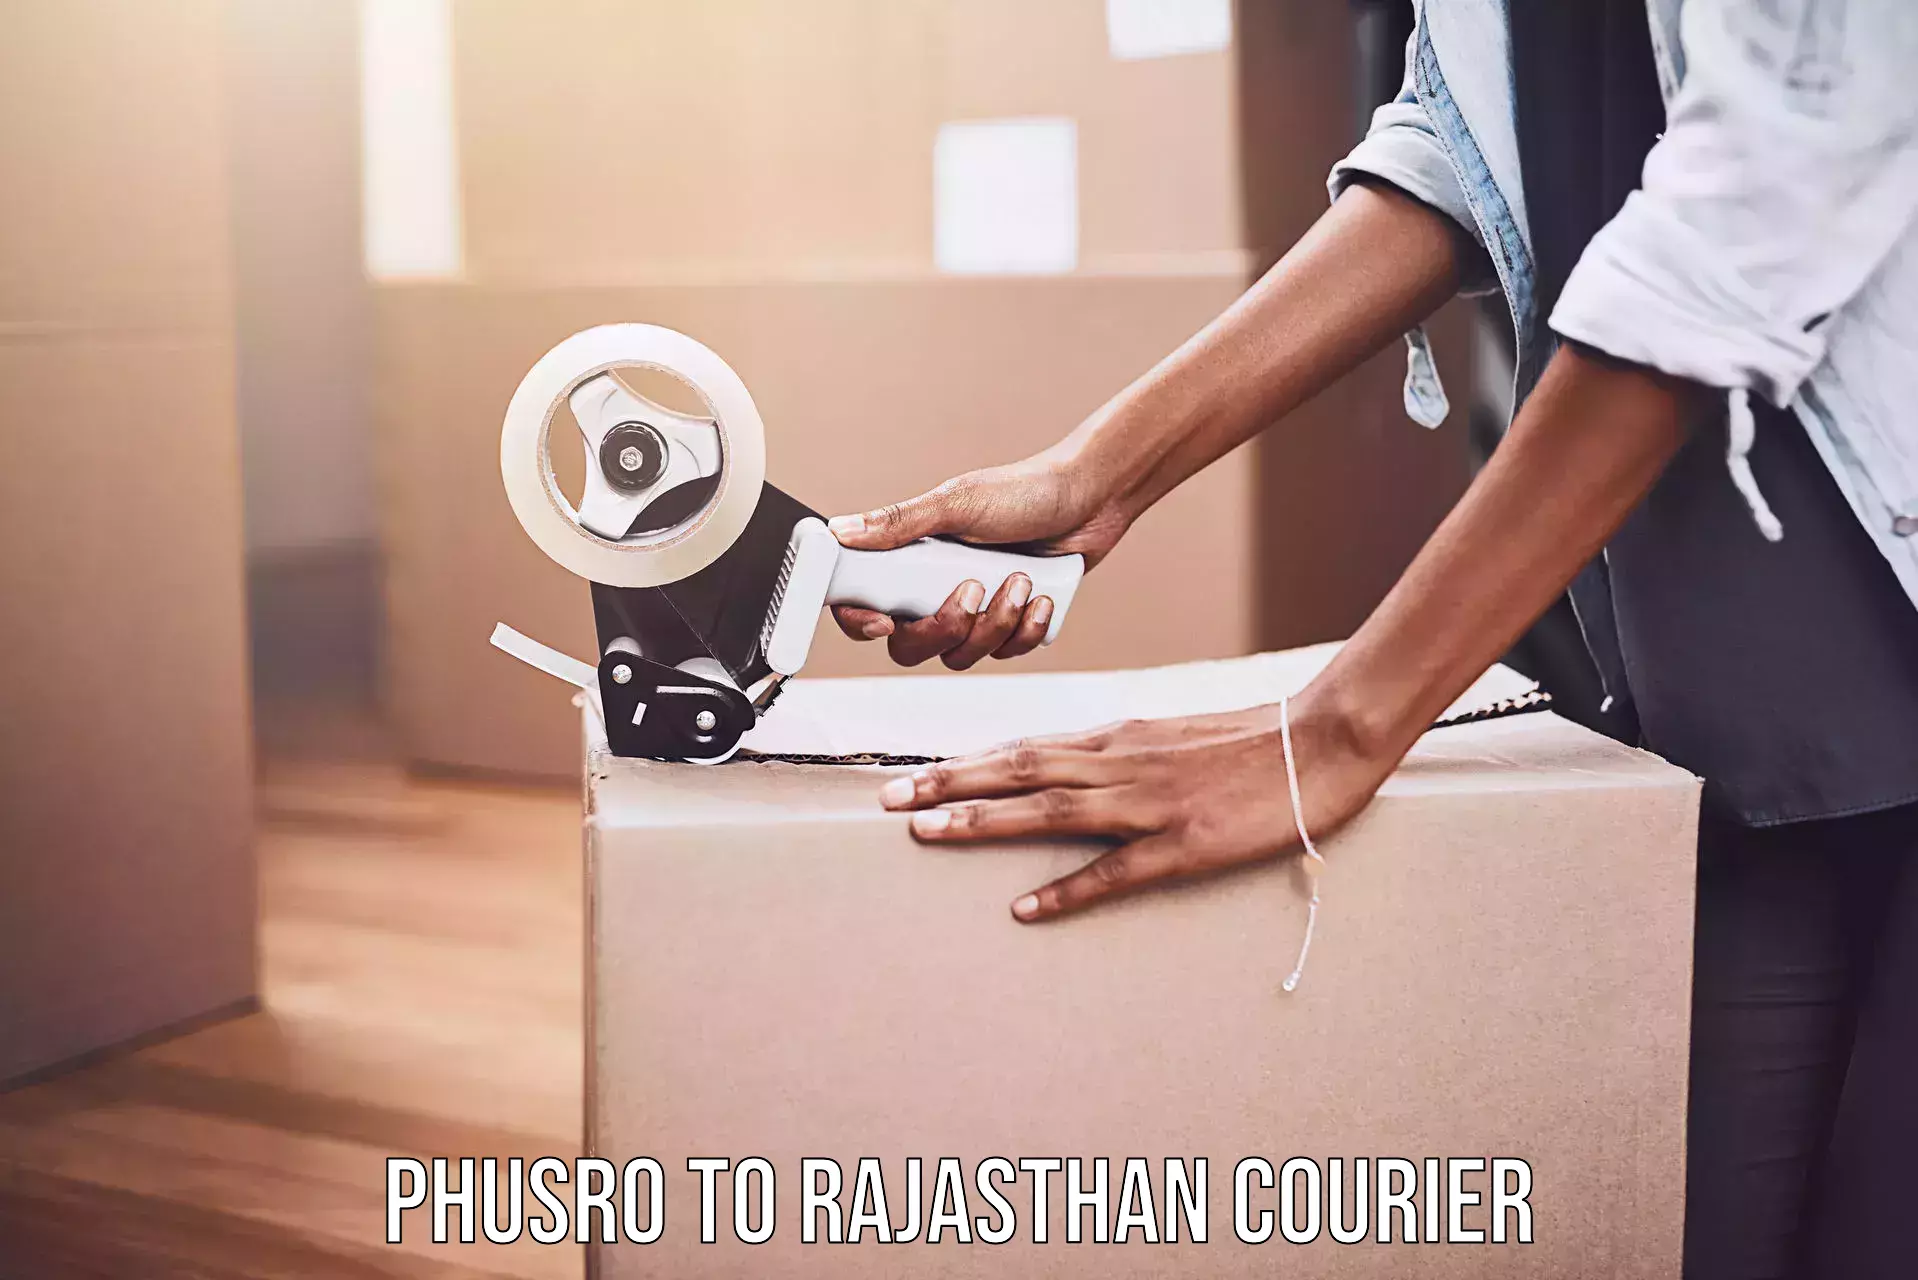 Sustainable shipping practices Phusro to Rajasthan